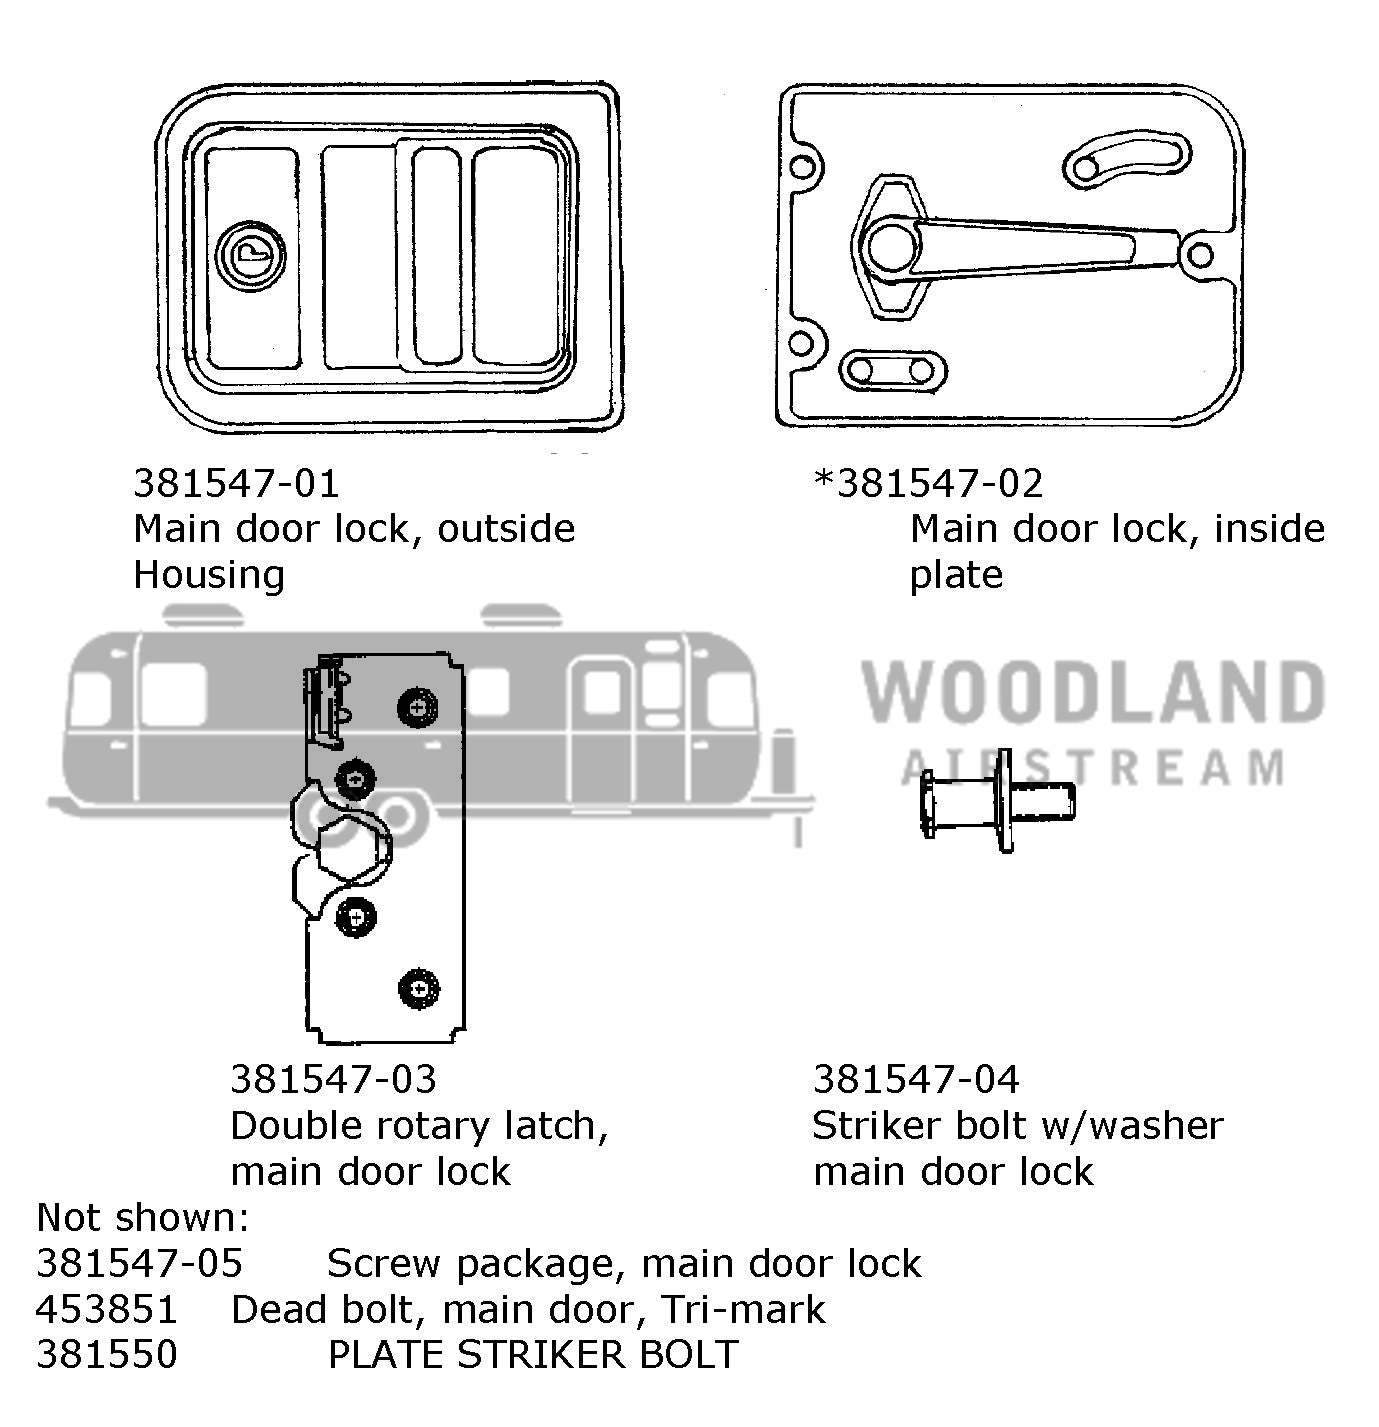 Airstream Double Rotary Latch for Main Door Lock with Deadbolt, Left Hand - 381547-03